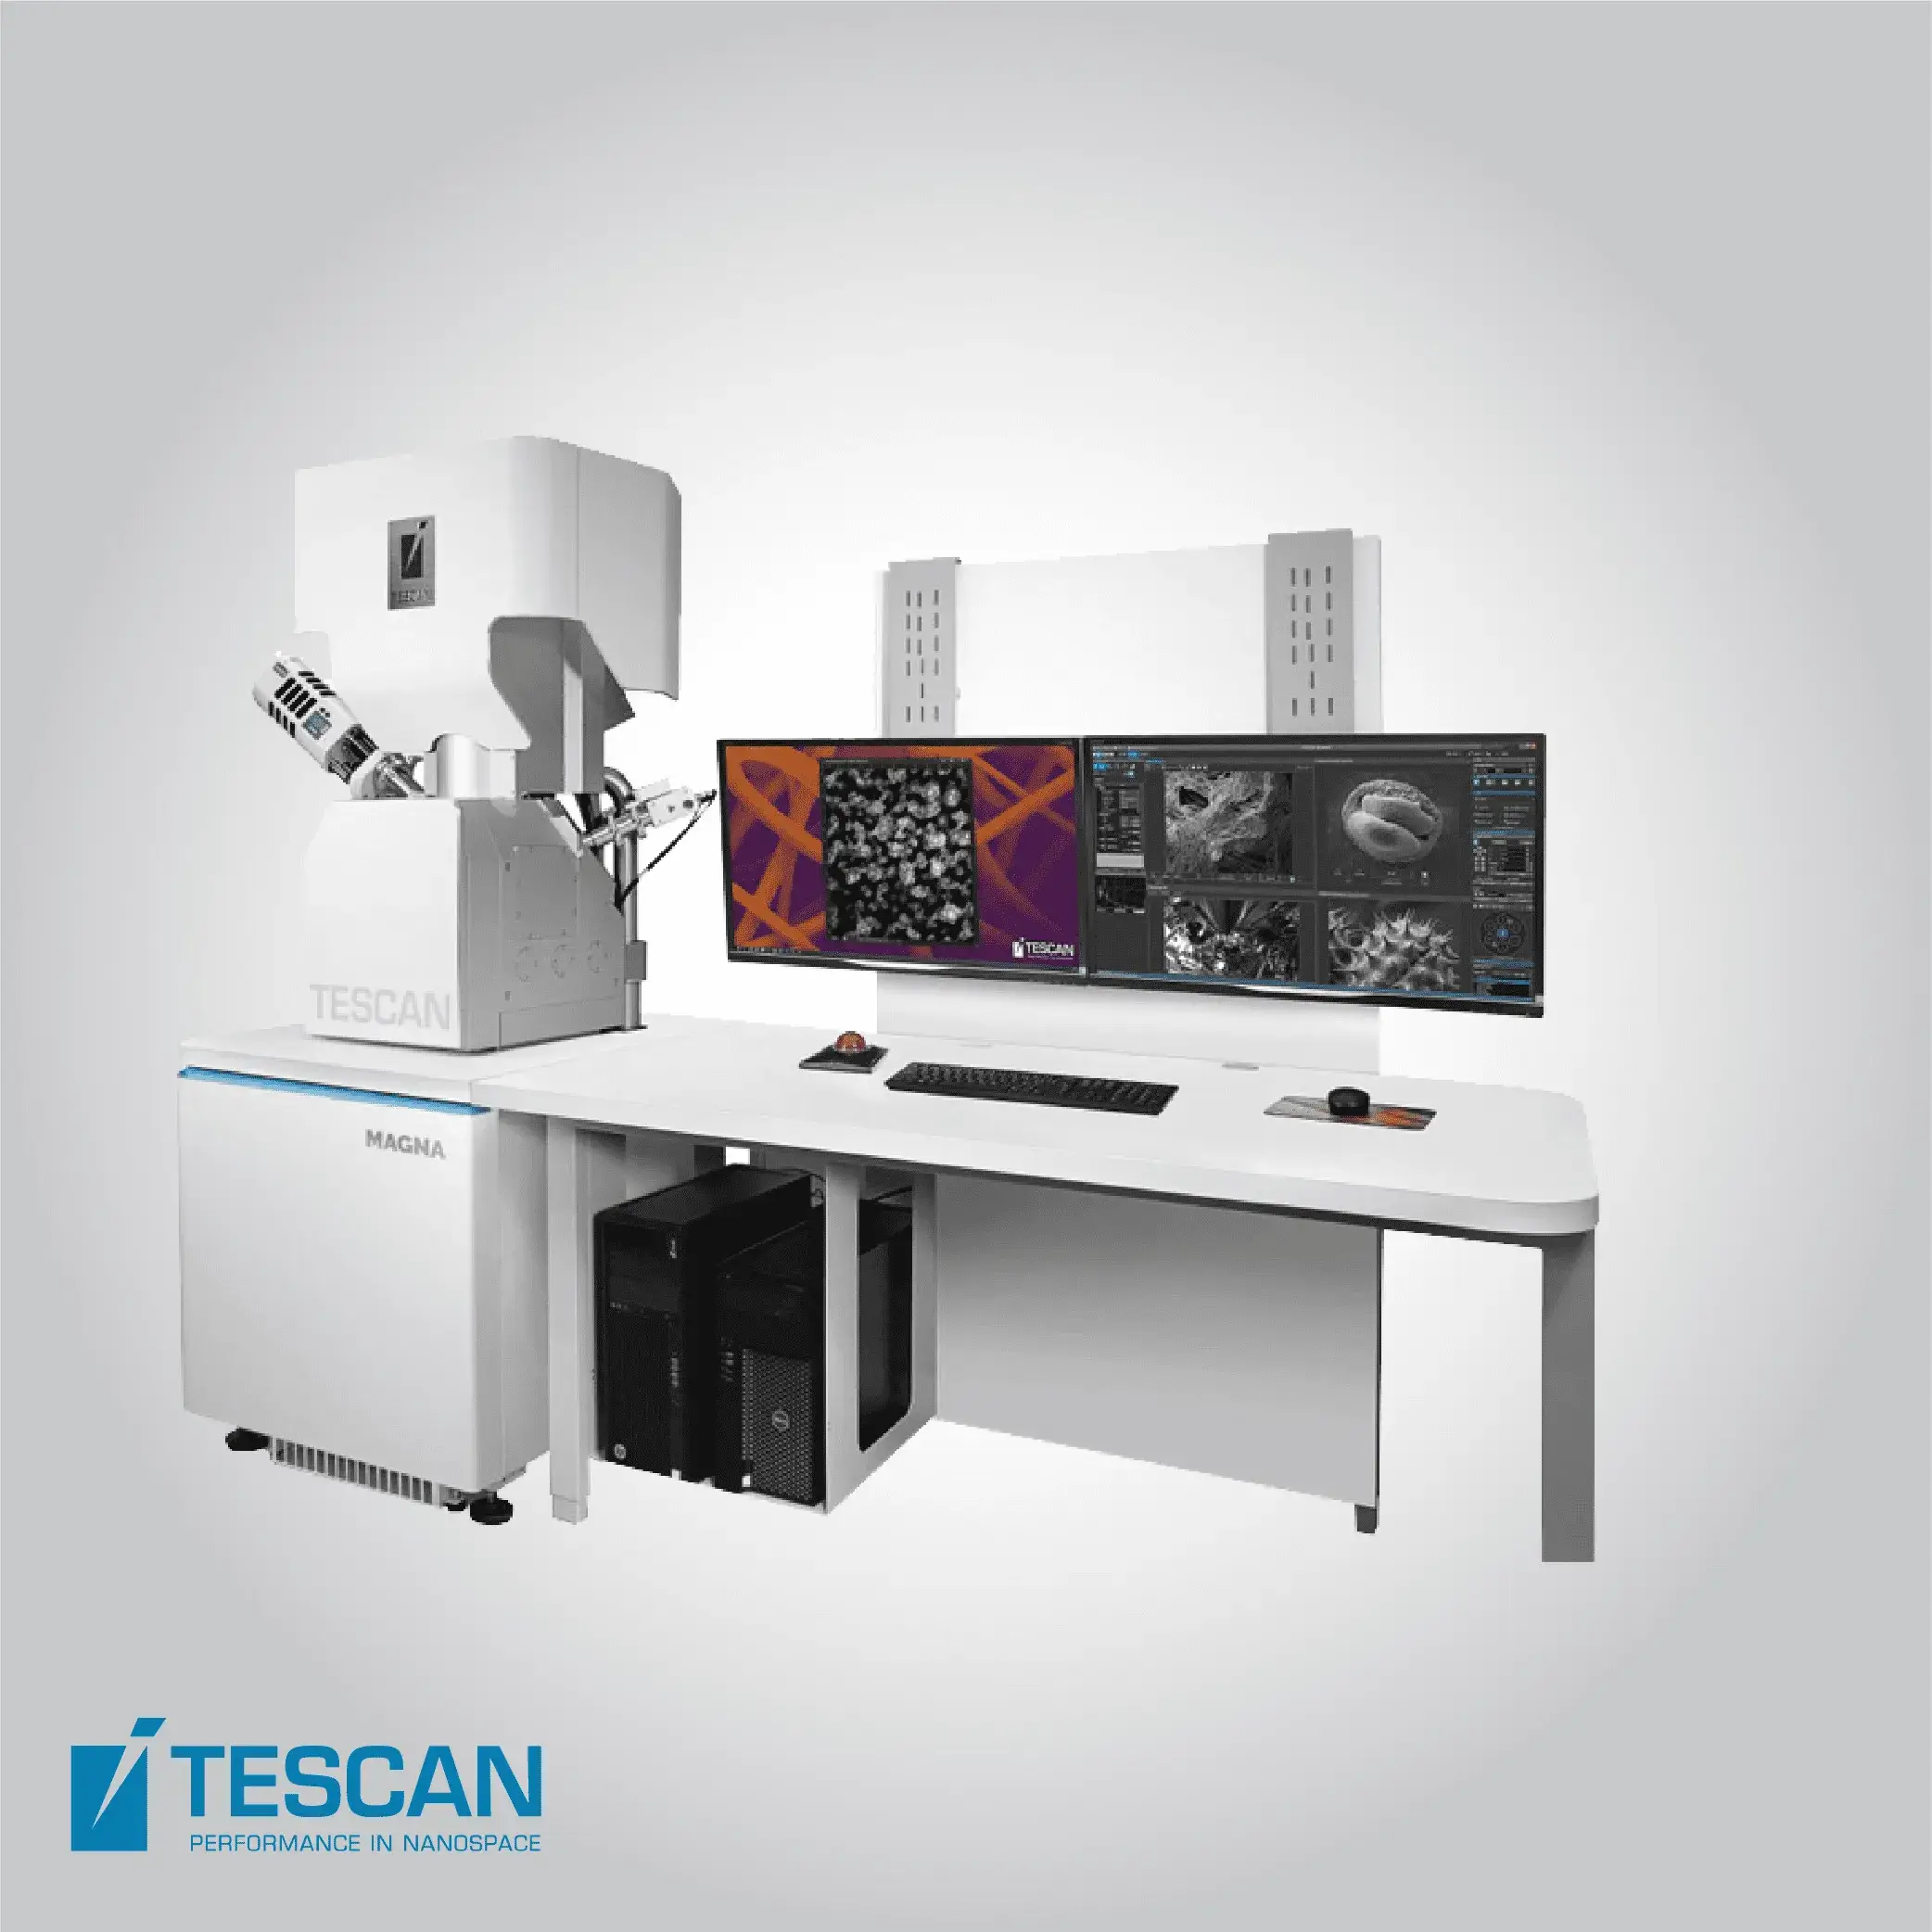 TESCAN products